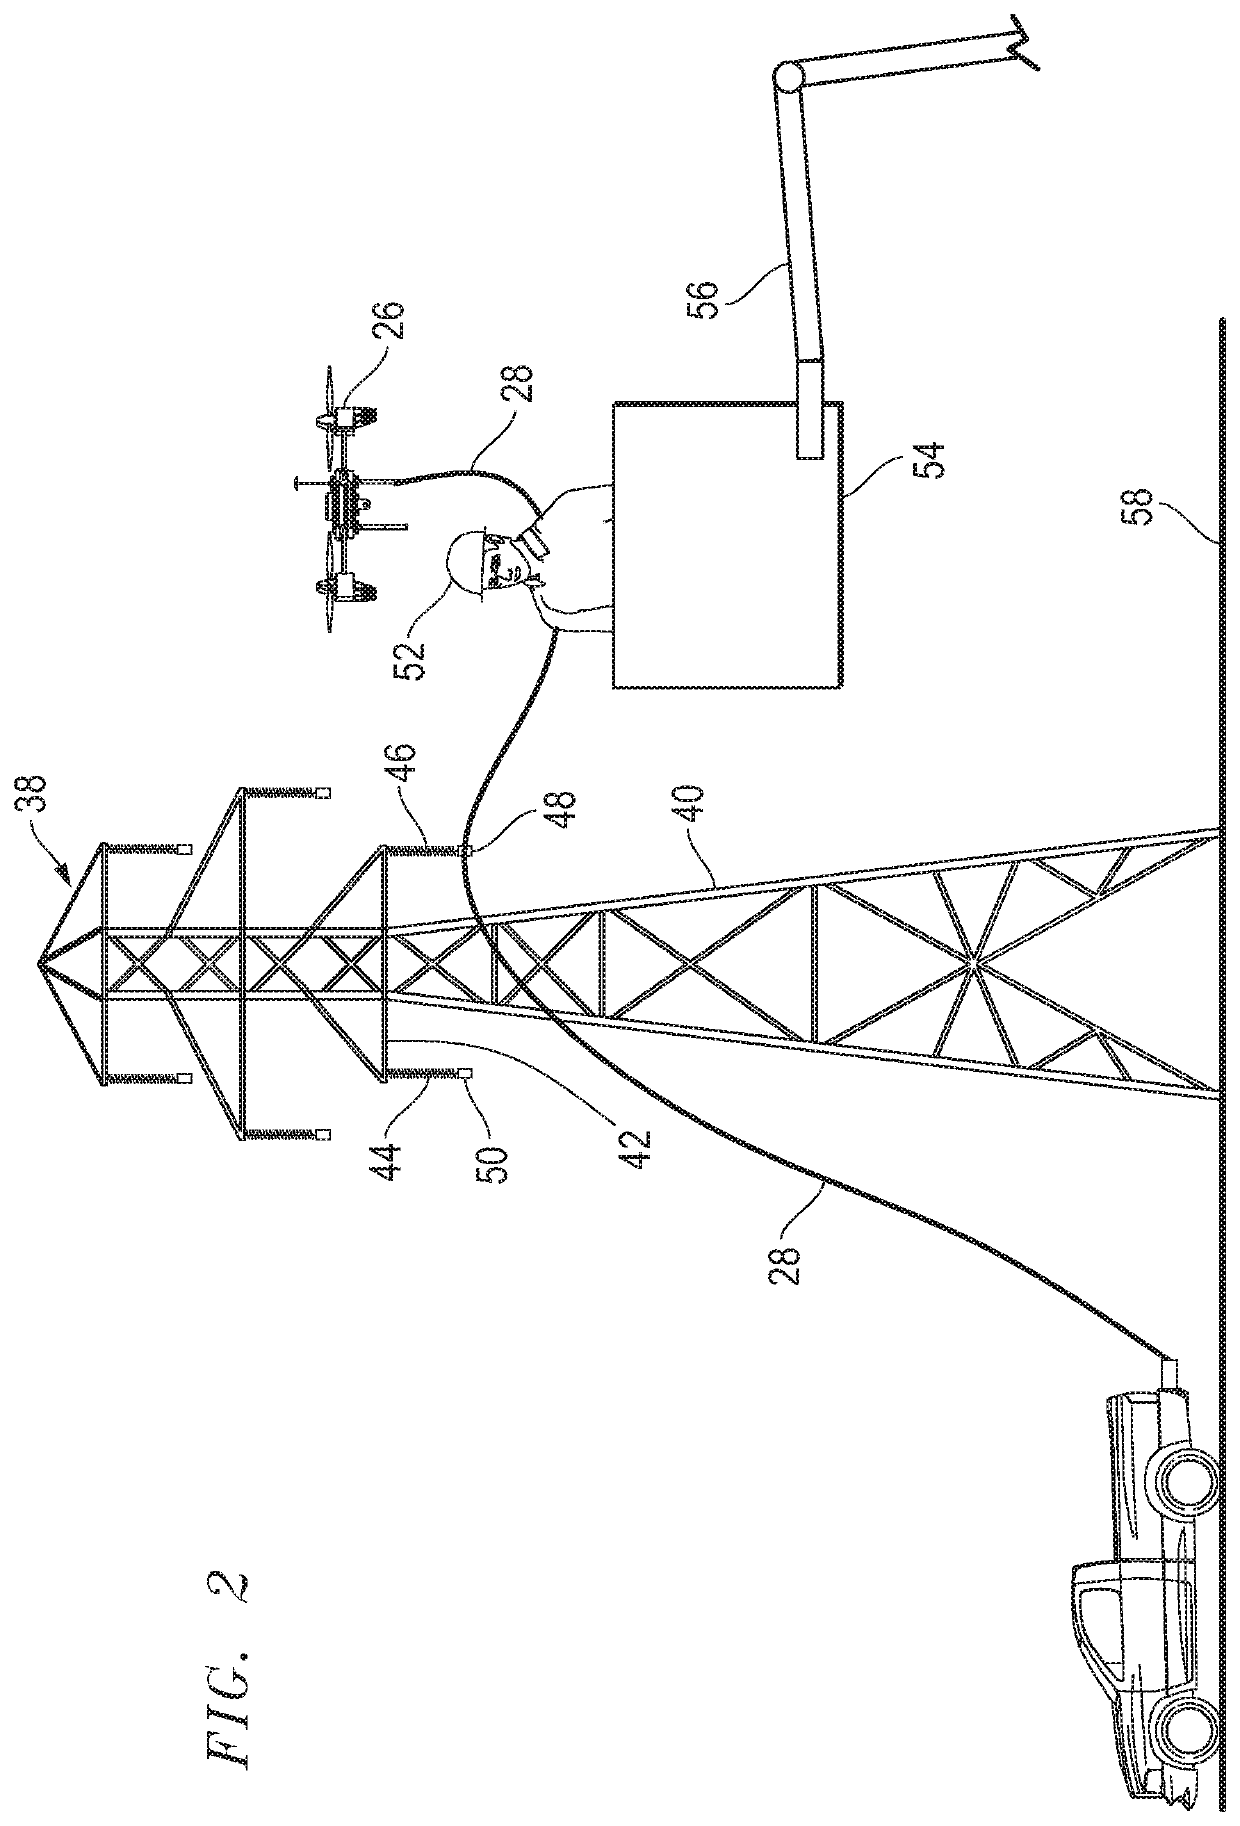 Apparatus and method for placing and tensioning an aerial, rope through a traveler of a power line